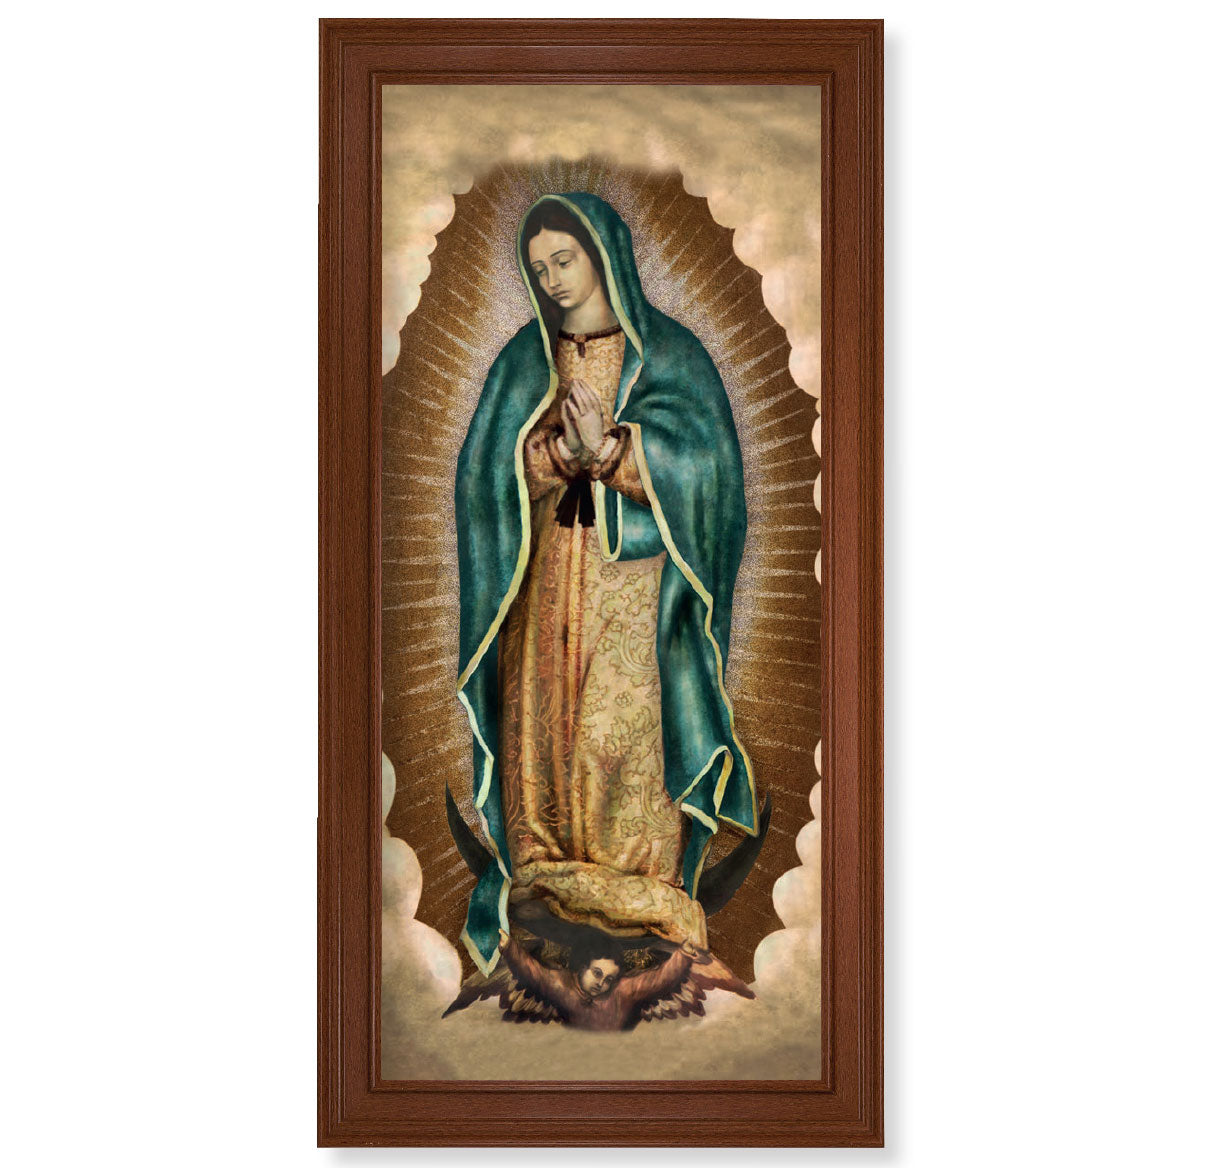 Our Lady of Guadalupe Picture Framed Wall Art Decor, Extra Large, Traditional Natural Walnut Finish Fluted Frame